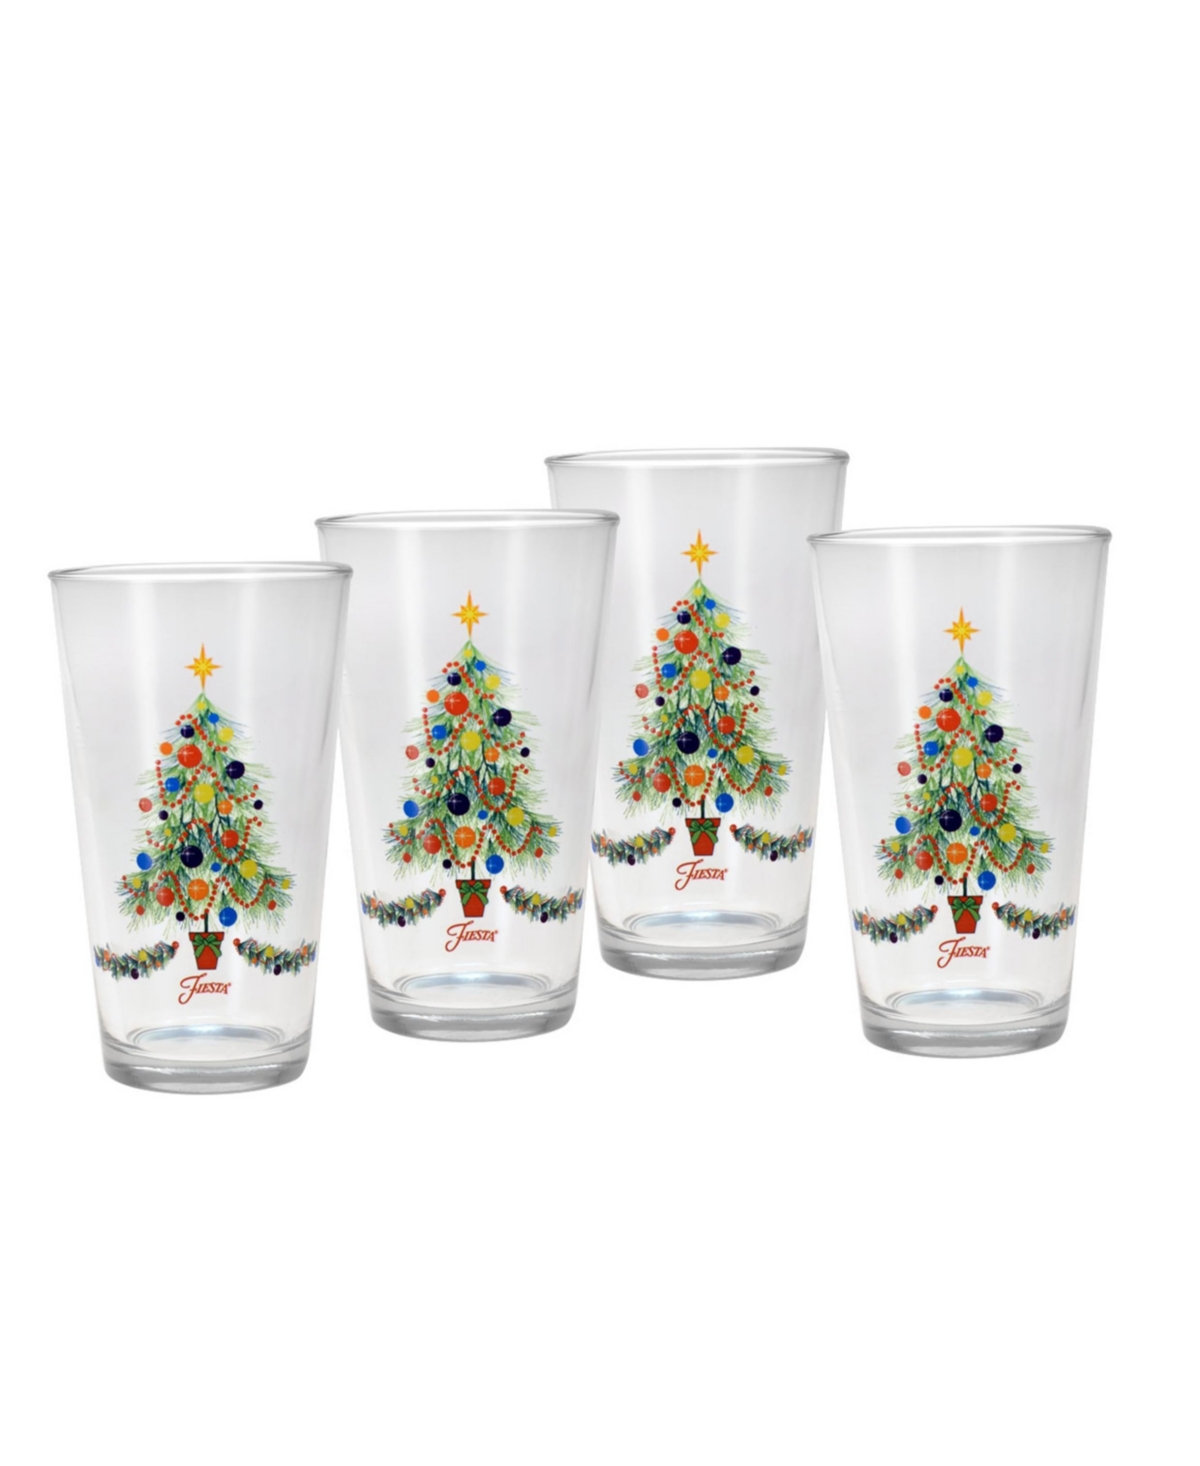 Fiesta Christmas Tree Tapered Cooler 4 Piece Glass Set, 16 oz In Multi